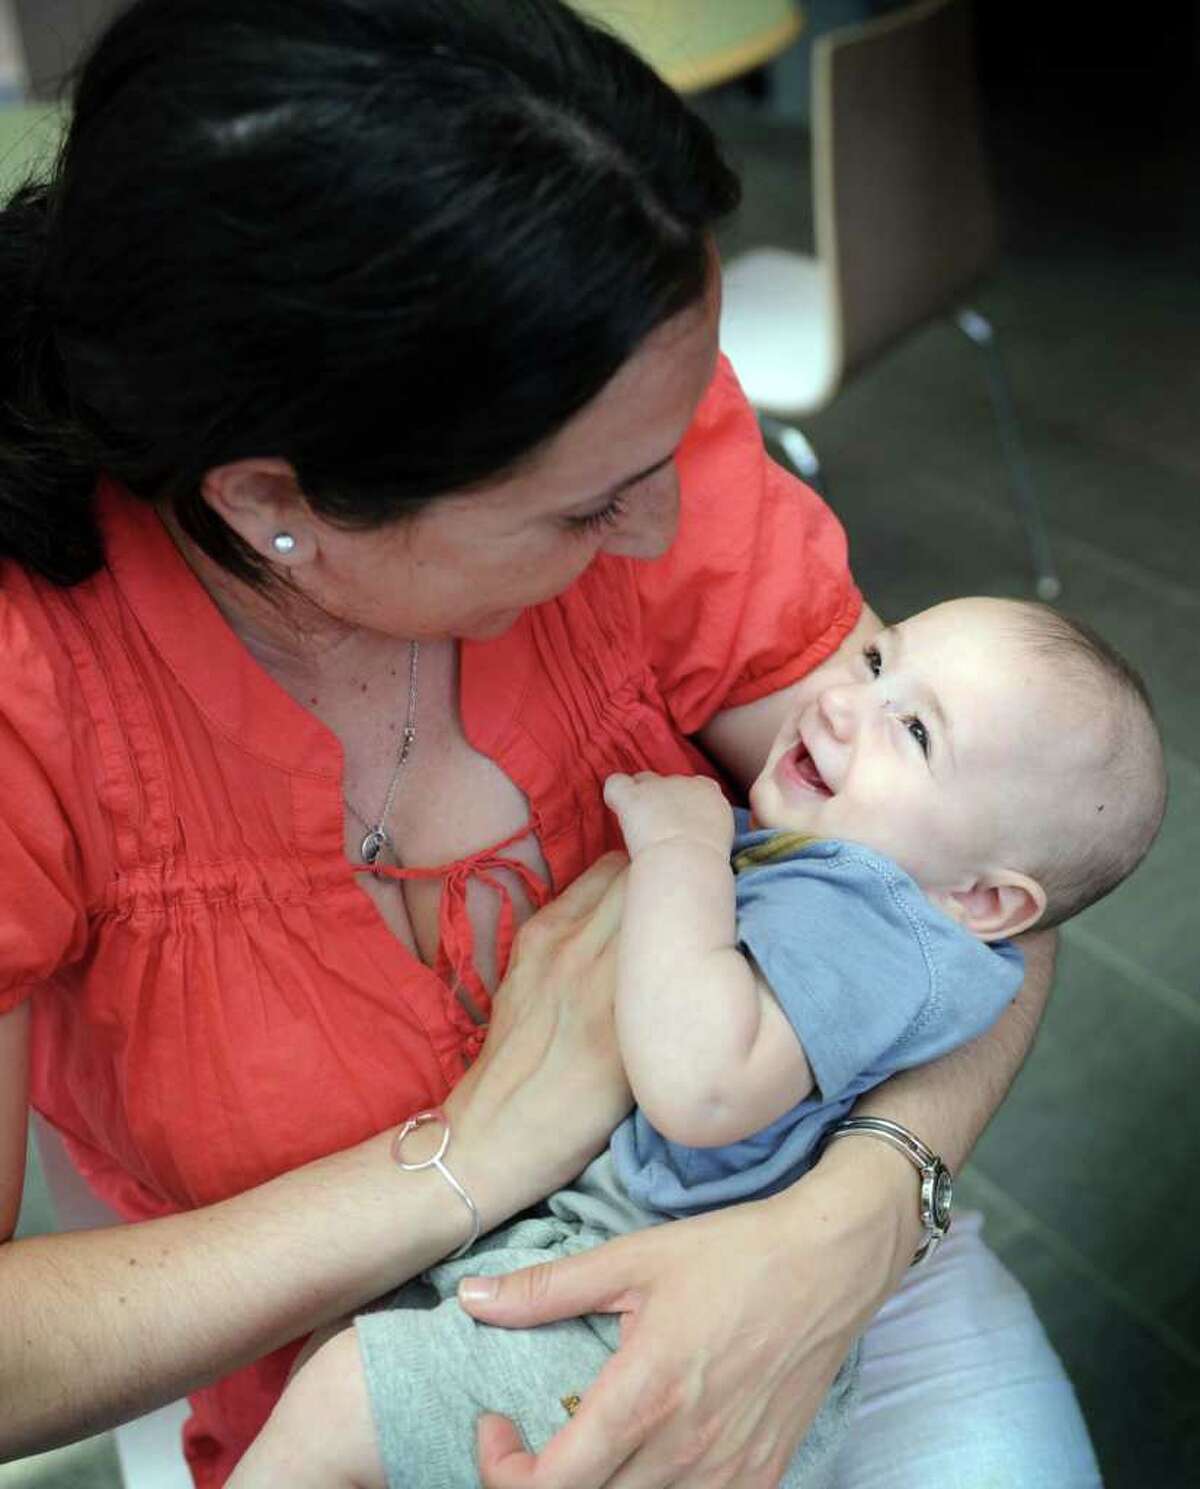 Rhonda Trust-Schwartz, of Fairfield, holds her four-month-old son Ezra during a "nurse-in" at Trumbull Mall Tuesday, May 31, 2011. A group of nursing mothers staged the get together after a woman was allegedly told to "cover-up" while nursing her child in the food court. Trust-Schwartz is policy and advocacy chair for the Connecticut Breastfeeding Coalition as well as a certified Lactation Counselor.